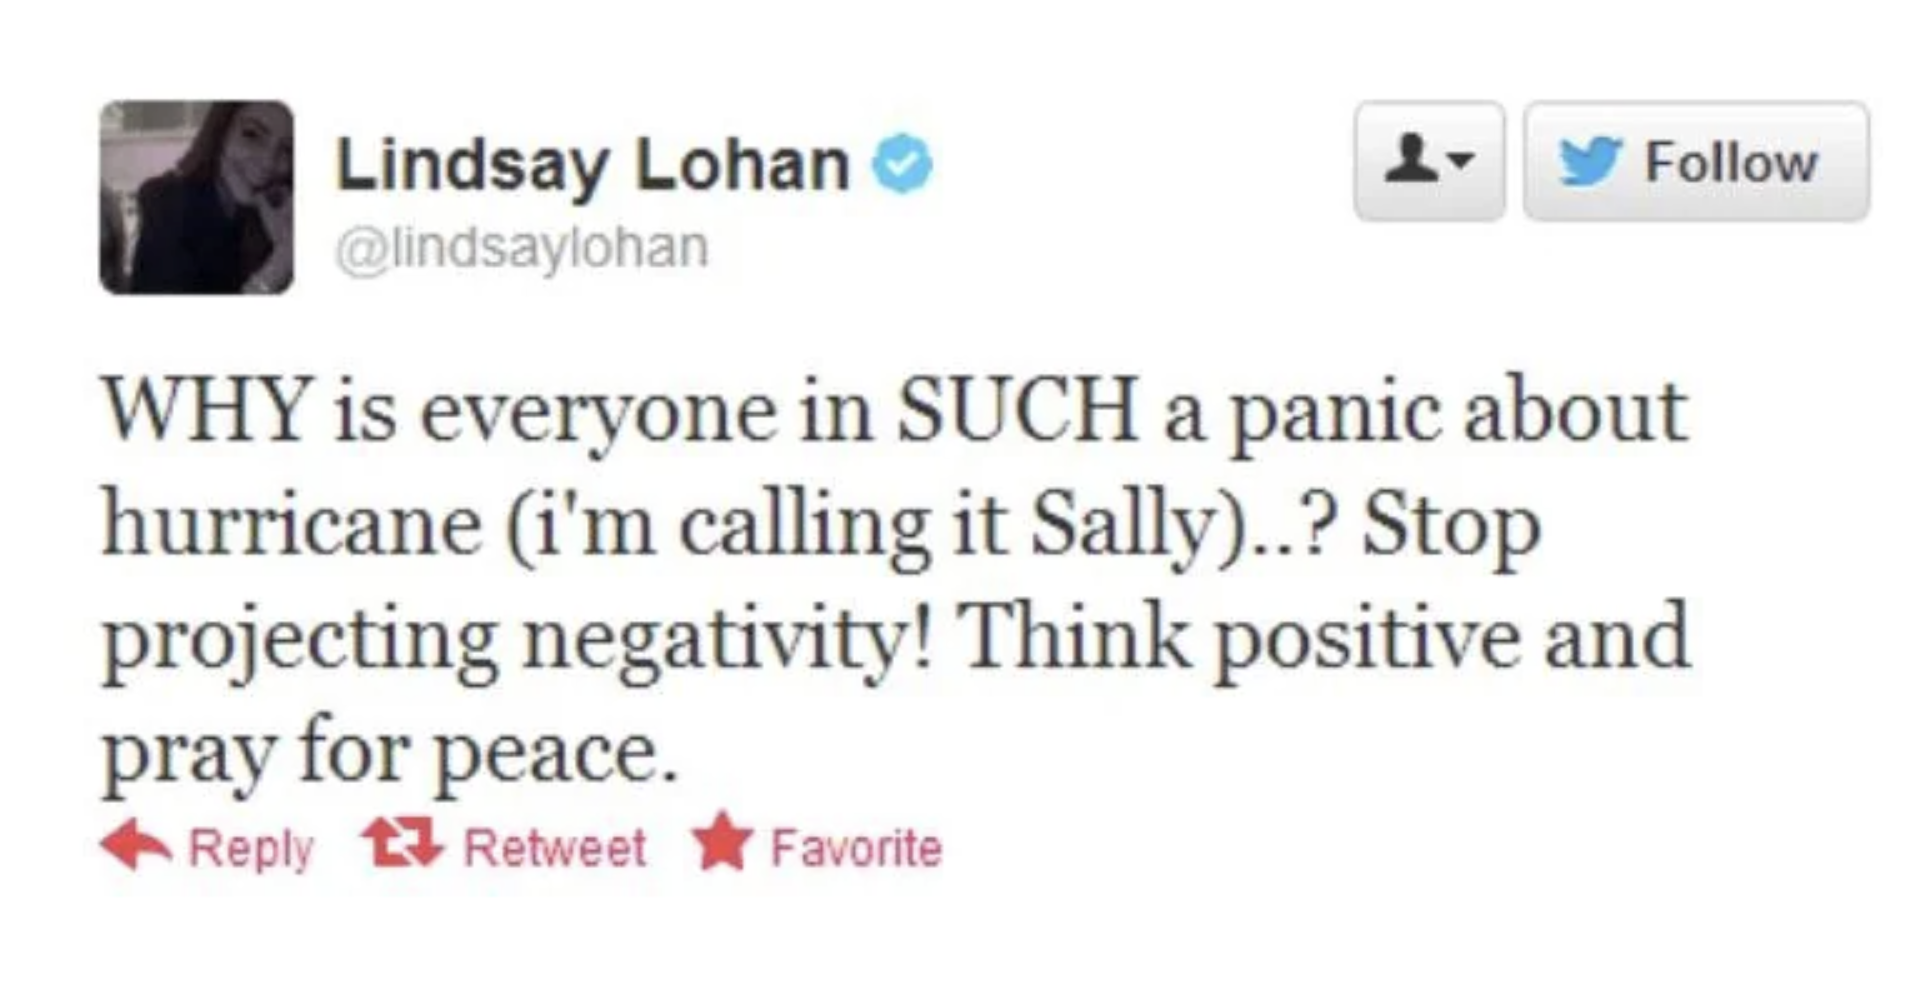 screenshot - Lindsay Lohan lohan Why is everyone in Such a panic about hurricane i'm calling it Sally..? Stop projecting negativity! Think positive and pray for peace. Retweet Favorite